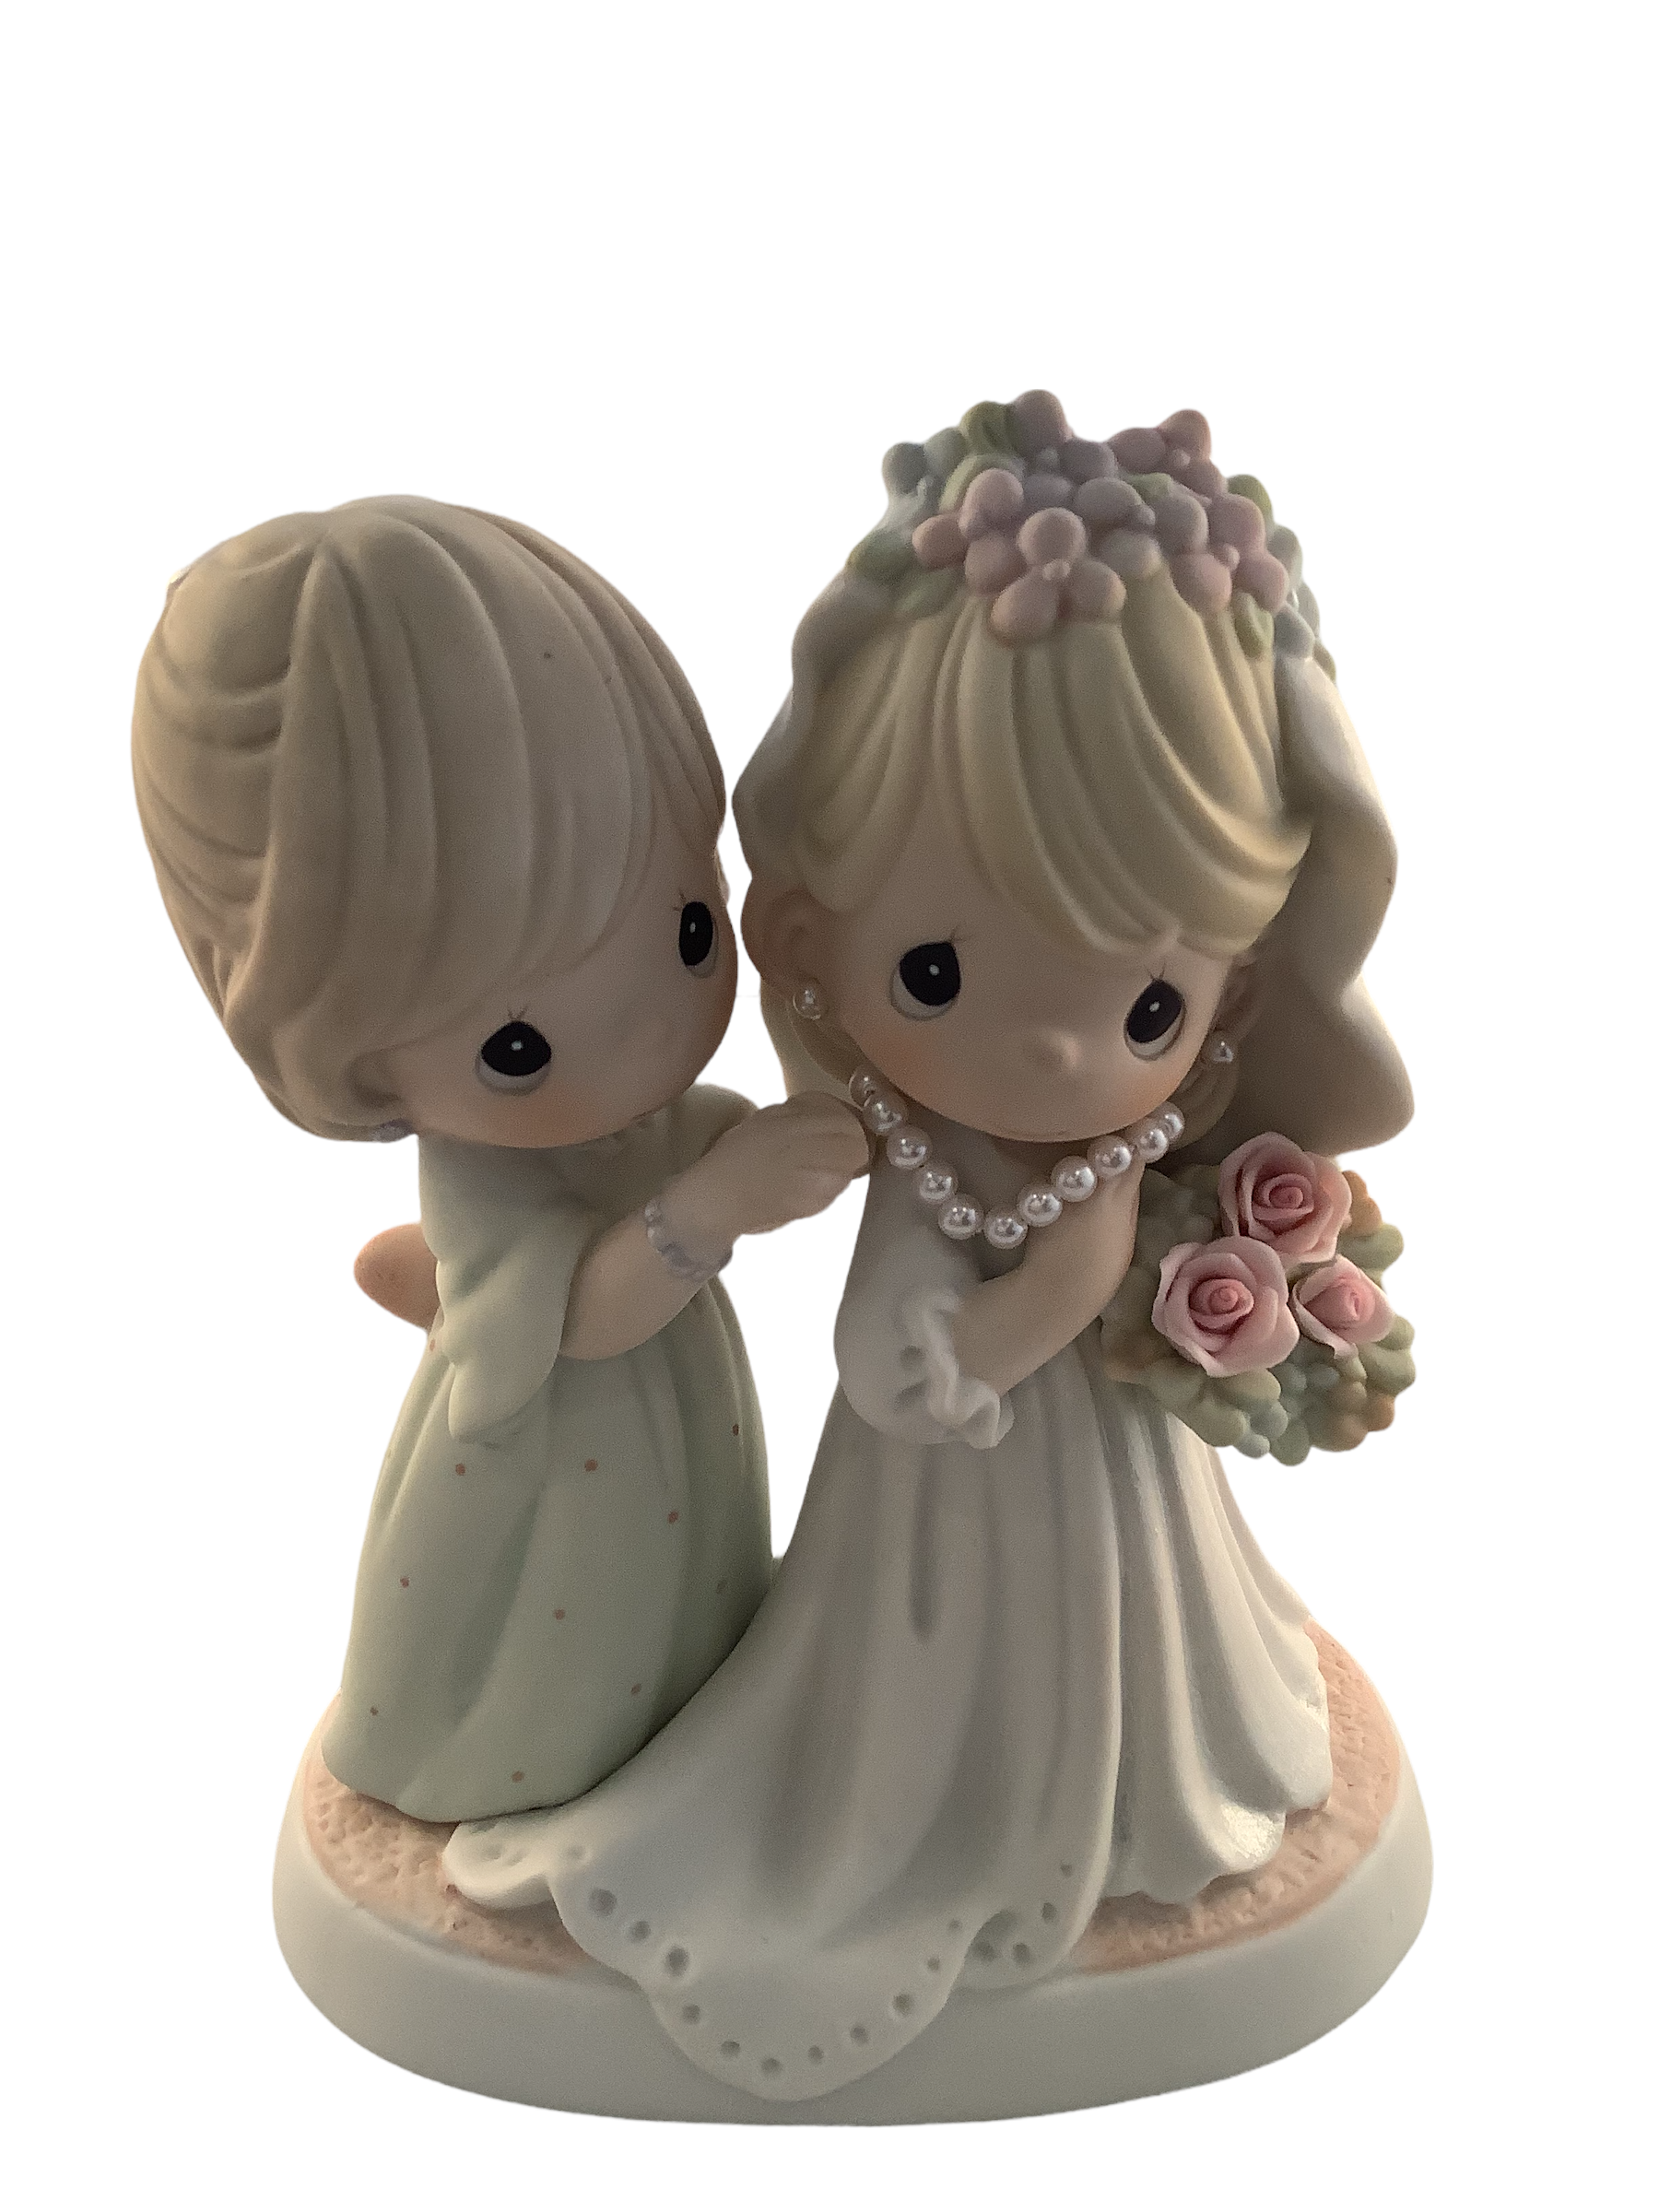 Beautiful And Blushing, My Baby's Now A Bride - Precious Moment Figurine